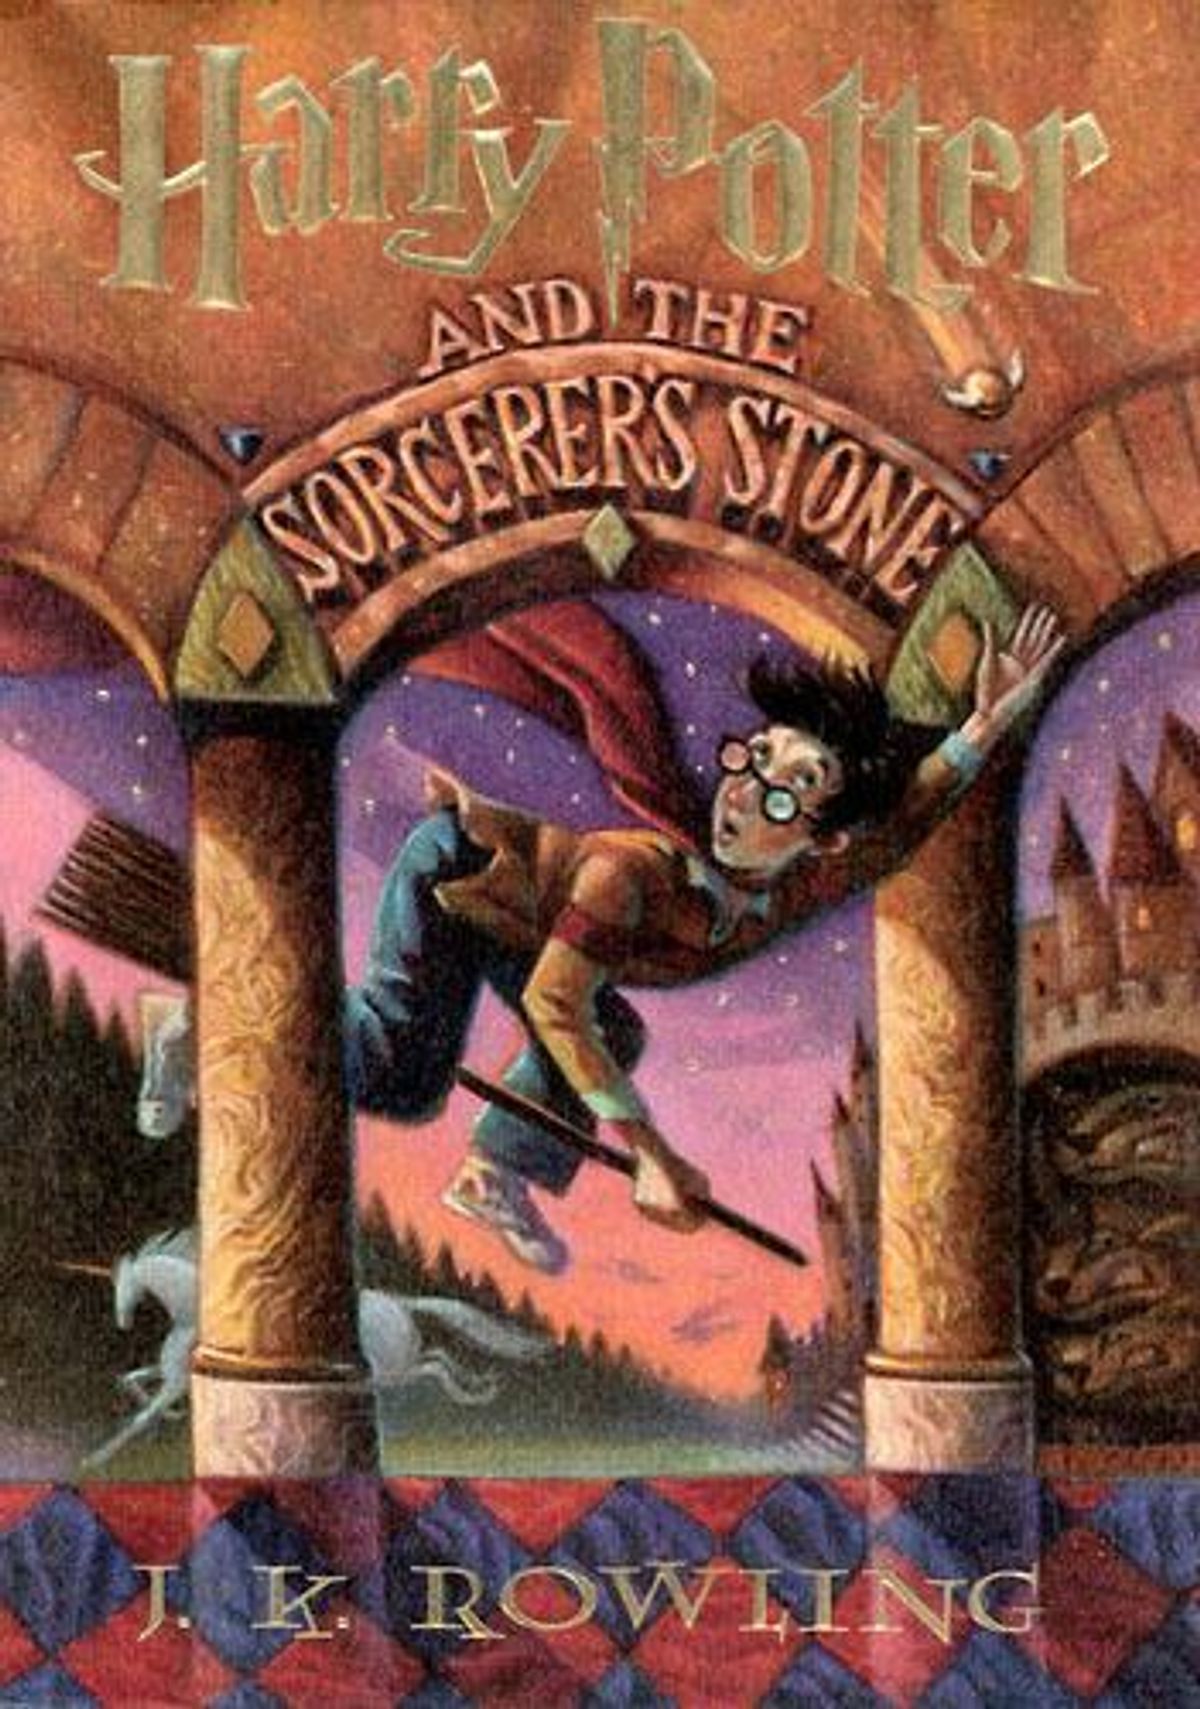 15 Young Adult Series To Read That Aren't Harry Potter